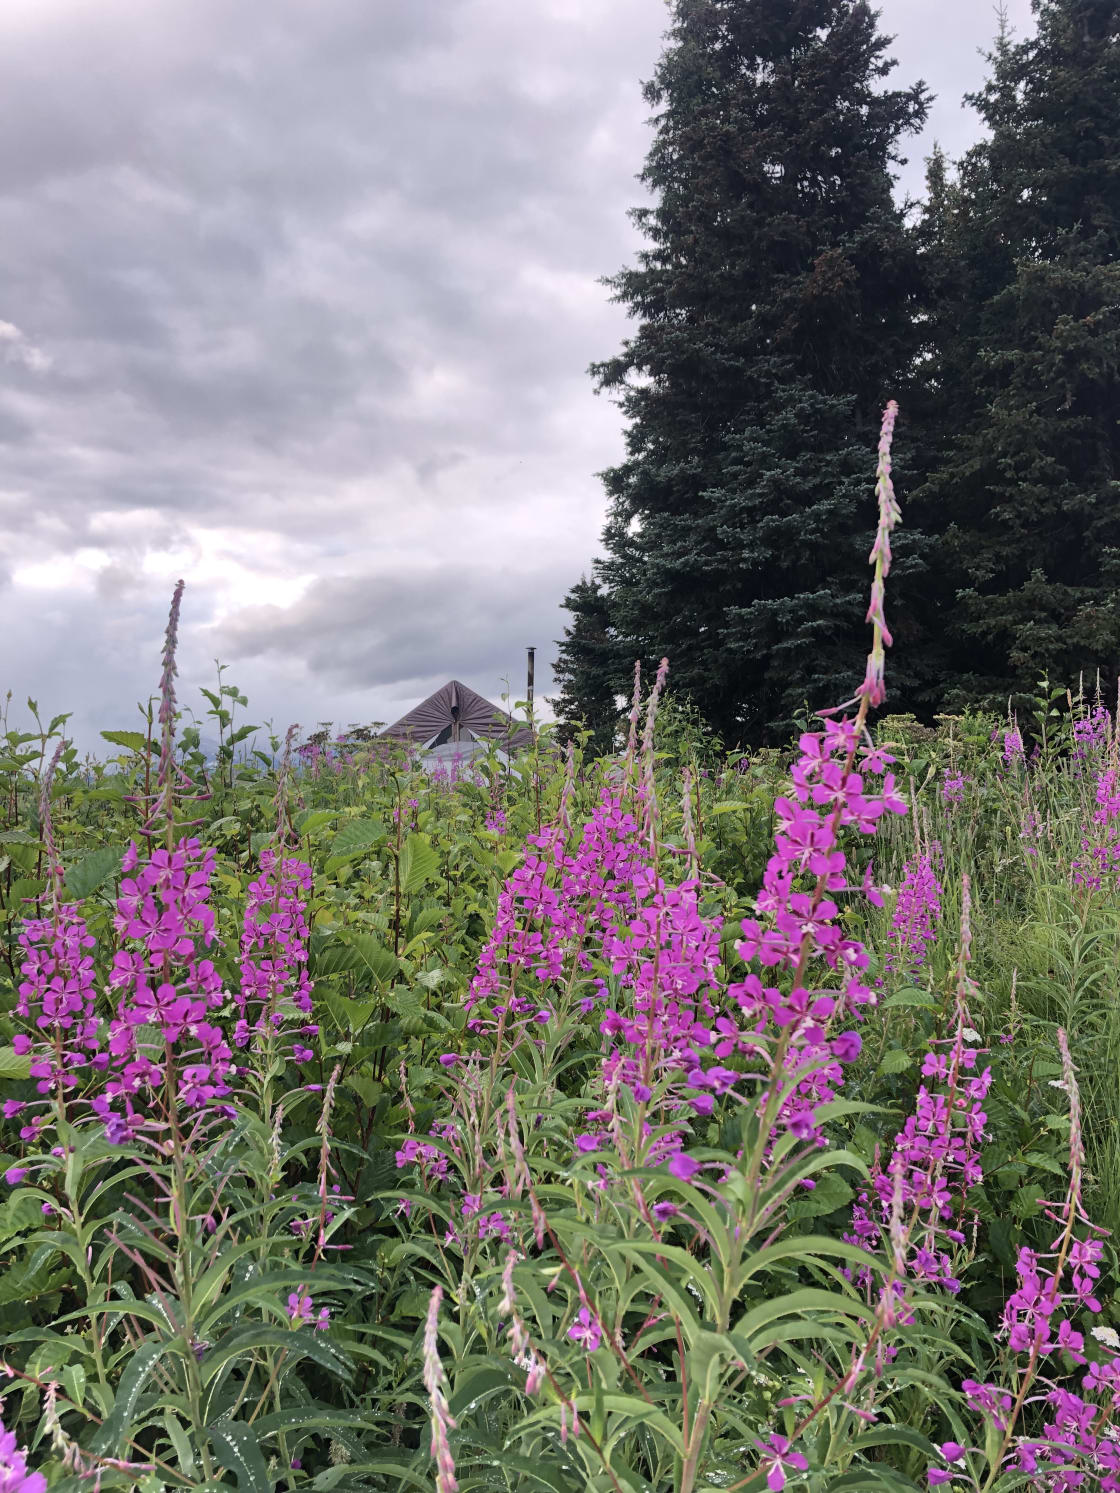 Fireweed galore and you can see the top of the wall tent we stayed at- with the little chimney 